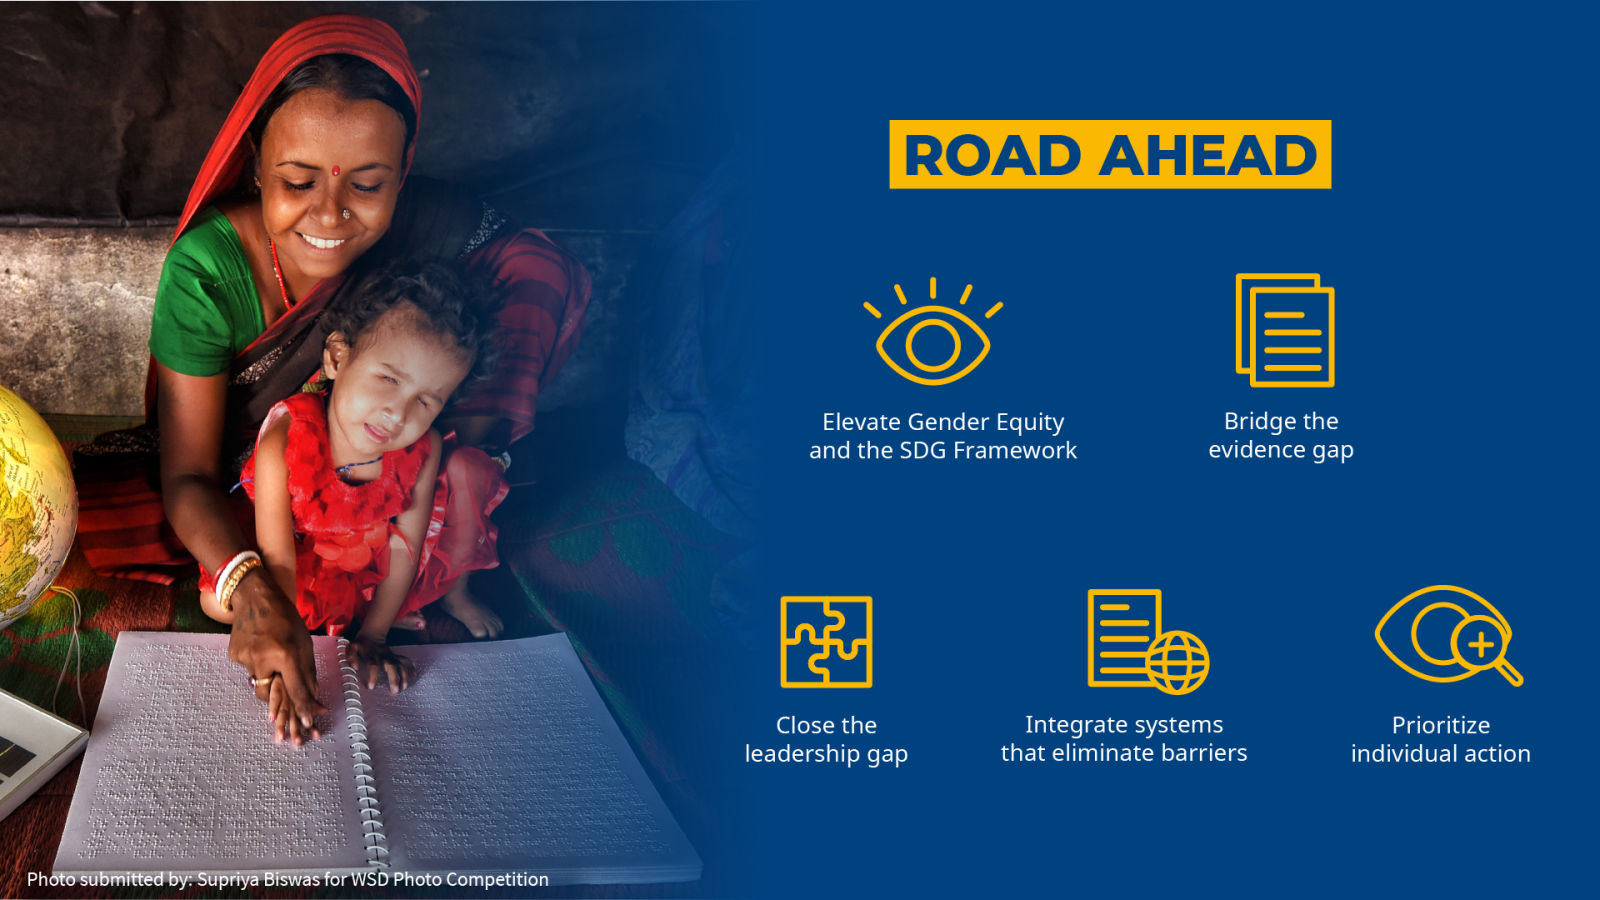 Road Ahead Elevate Genre Equity and the SDG Framework Bridge the evidence gap Close the leadership gap Integrate systems that eliminate barriers Prioritize individual action